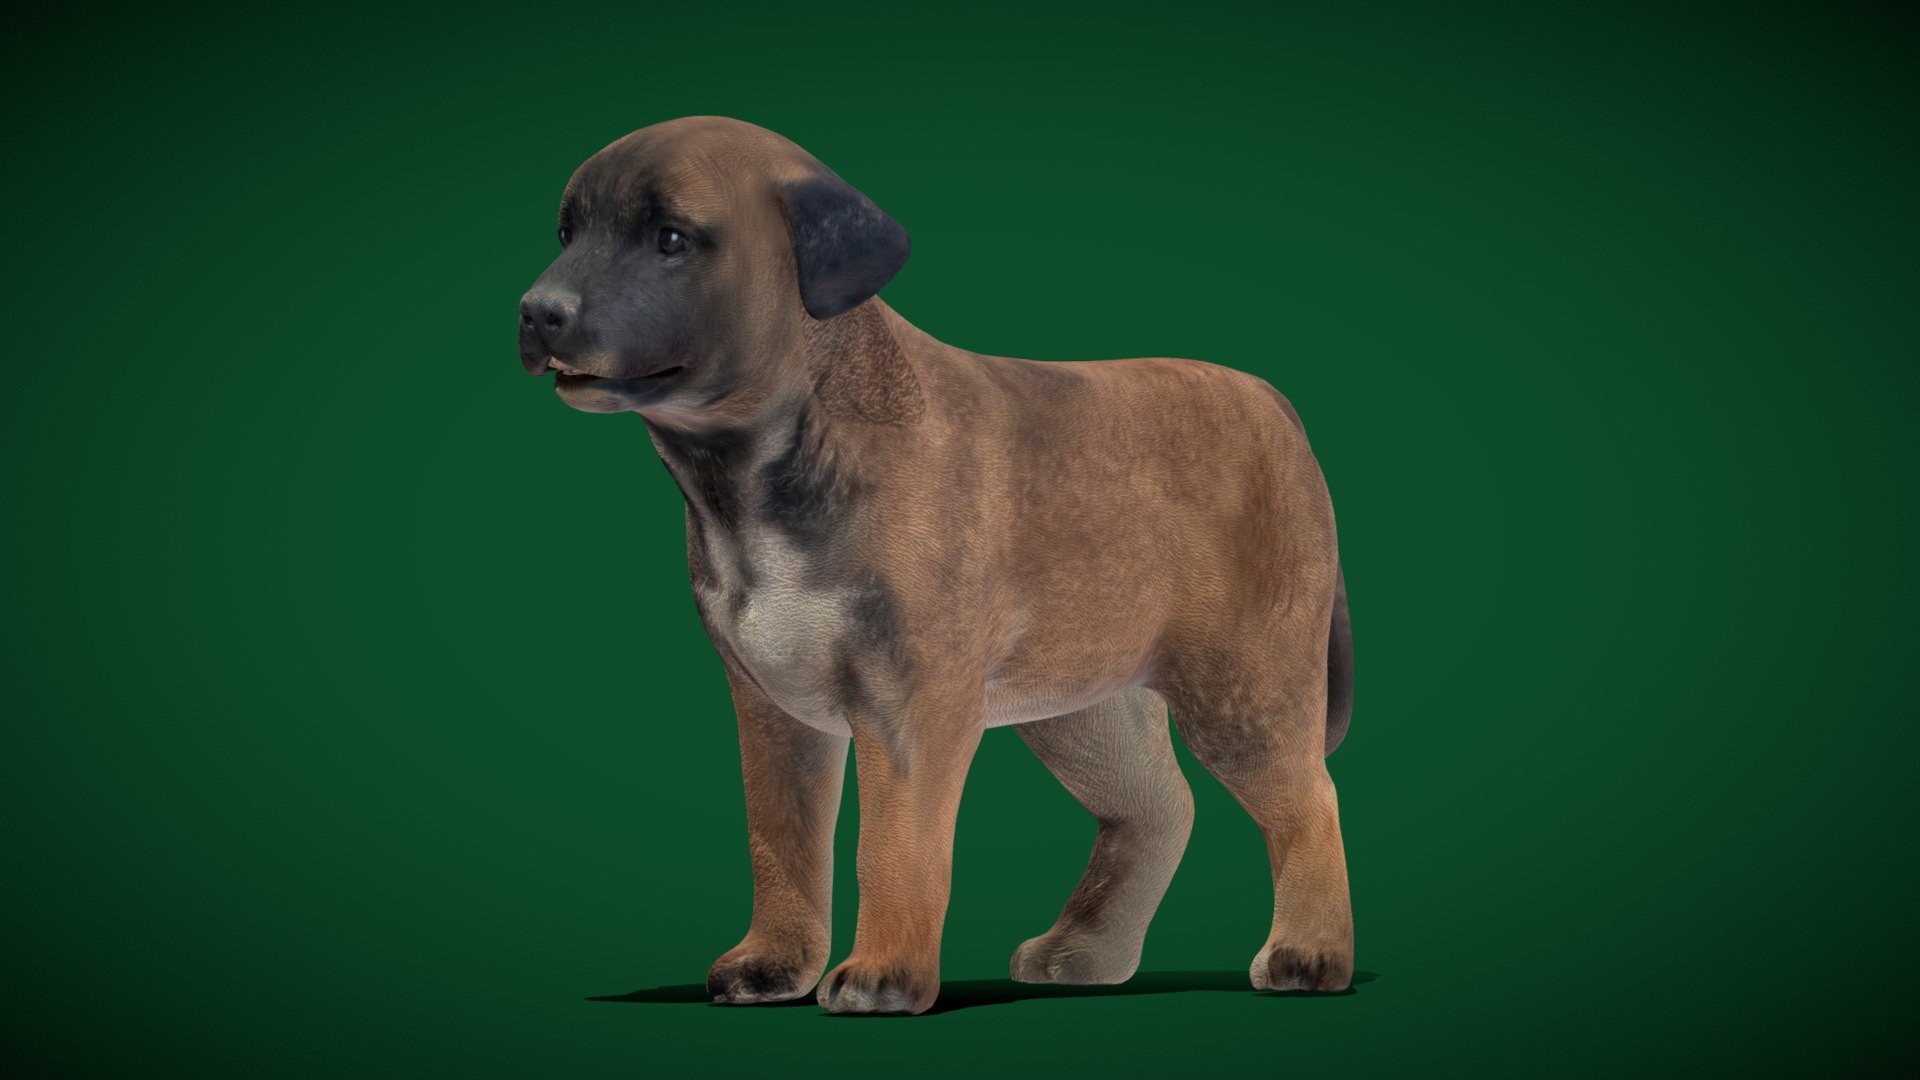 Belgian Shepherd Puppy( medium-sized herding dog )Baby Shepherd

Canis lupus familiaris Animal Dog breed   (Belgium) 

1 Draw Calls

MidPoly

GameReady For NPC (Usages)

Single Animation

4K PBR Textures Material

Unreal FBX (Unreal 4,5 Plus)

Unity FBX  

Blend File 

USDZ File (AR Ready). Real Scale Dimension

Textures Files

GLB File (Unreal 5.1  Plus Native Support)

Gltf File ( Spark AR, Lens Studio(SnapChat) , Effector(Tiktok) , Spline, Play Canvas ) Compatible

Triangles : 32198

Vertices  : 16189

Faces     : 17367

Edges     : 33551

** Diffuse, Metallic, Roughness , Normal Map ,Specular Map,AO**

The Belgian Shepherd is a breed of medium-sized herding dog from Belgium. While predominantly considered a single breed, it is bred in four distinct varieties based on coat type and colour; the long-haired &hellip; Wikipedia
FCI Number: 15
Hypoallergenic: No
Life expectancy: 10 – 14 years
Temperament: Stubborn, Friendly, Alert, Hard-working, Confident, Active, Protective, Watchful - Belgian Shepherd Puppy Dog - Buy Royalty Free 3D model by Nyilonelycompany 3d model